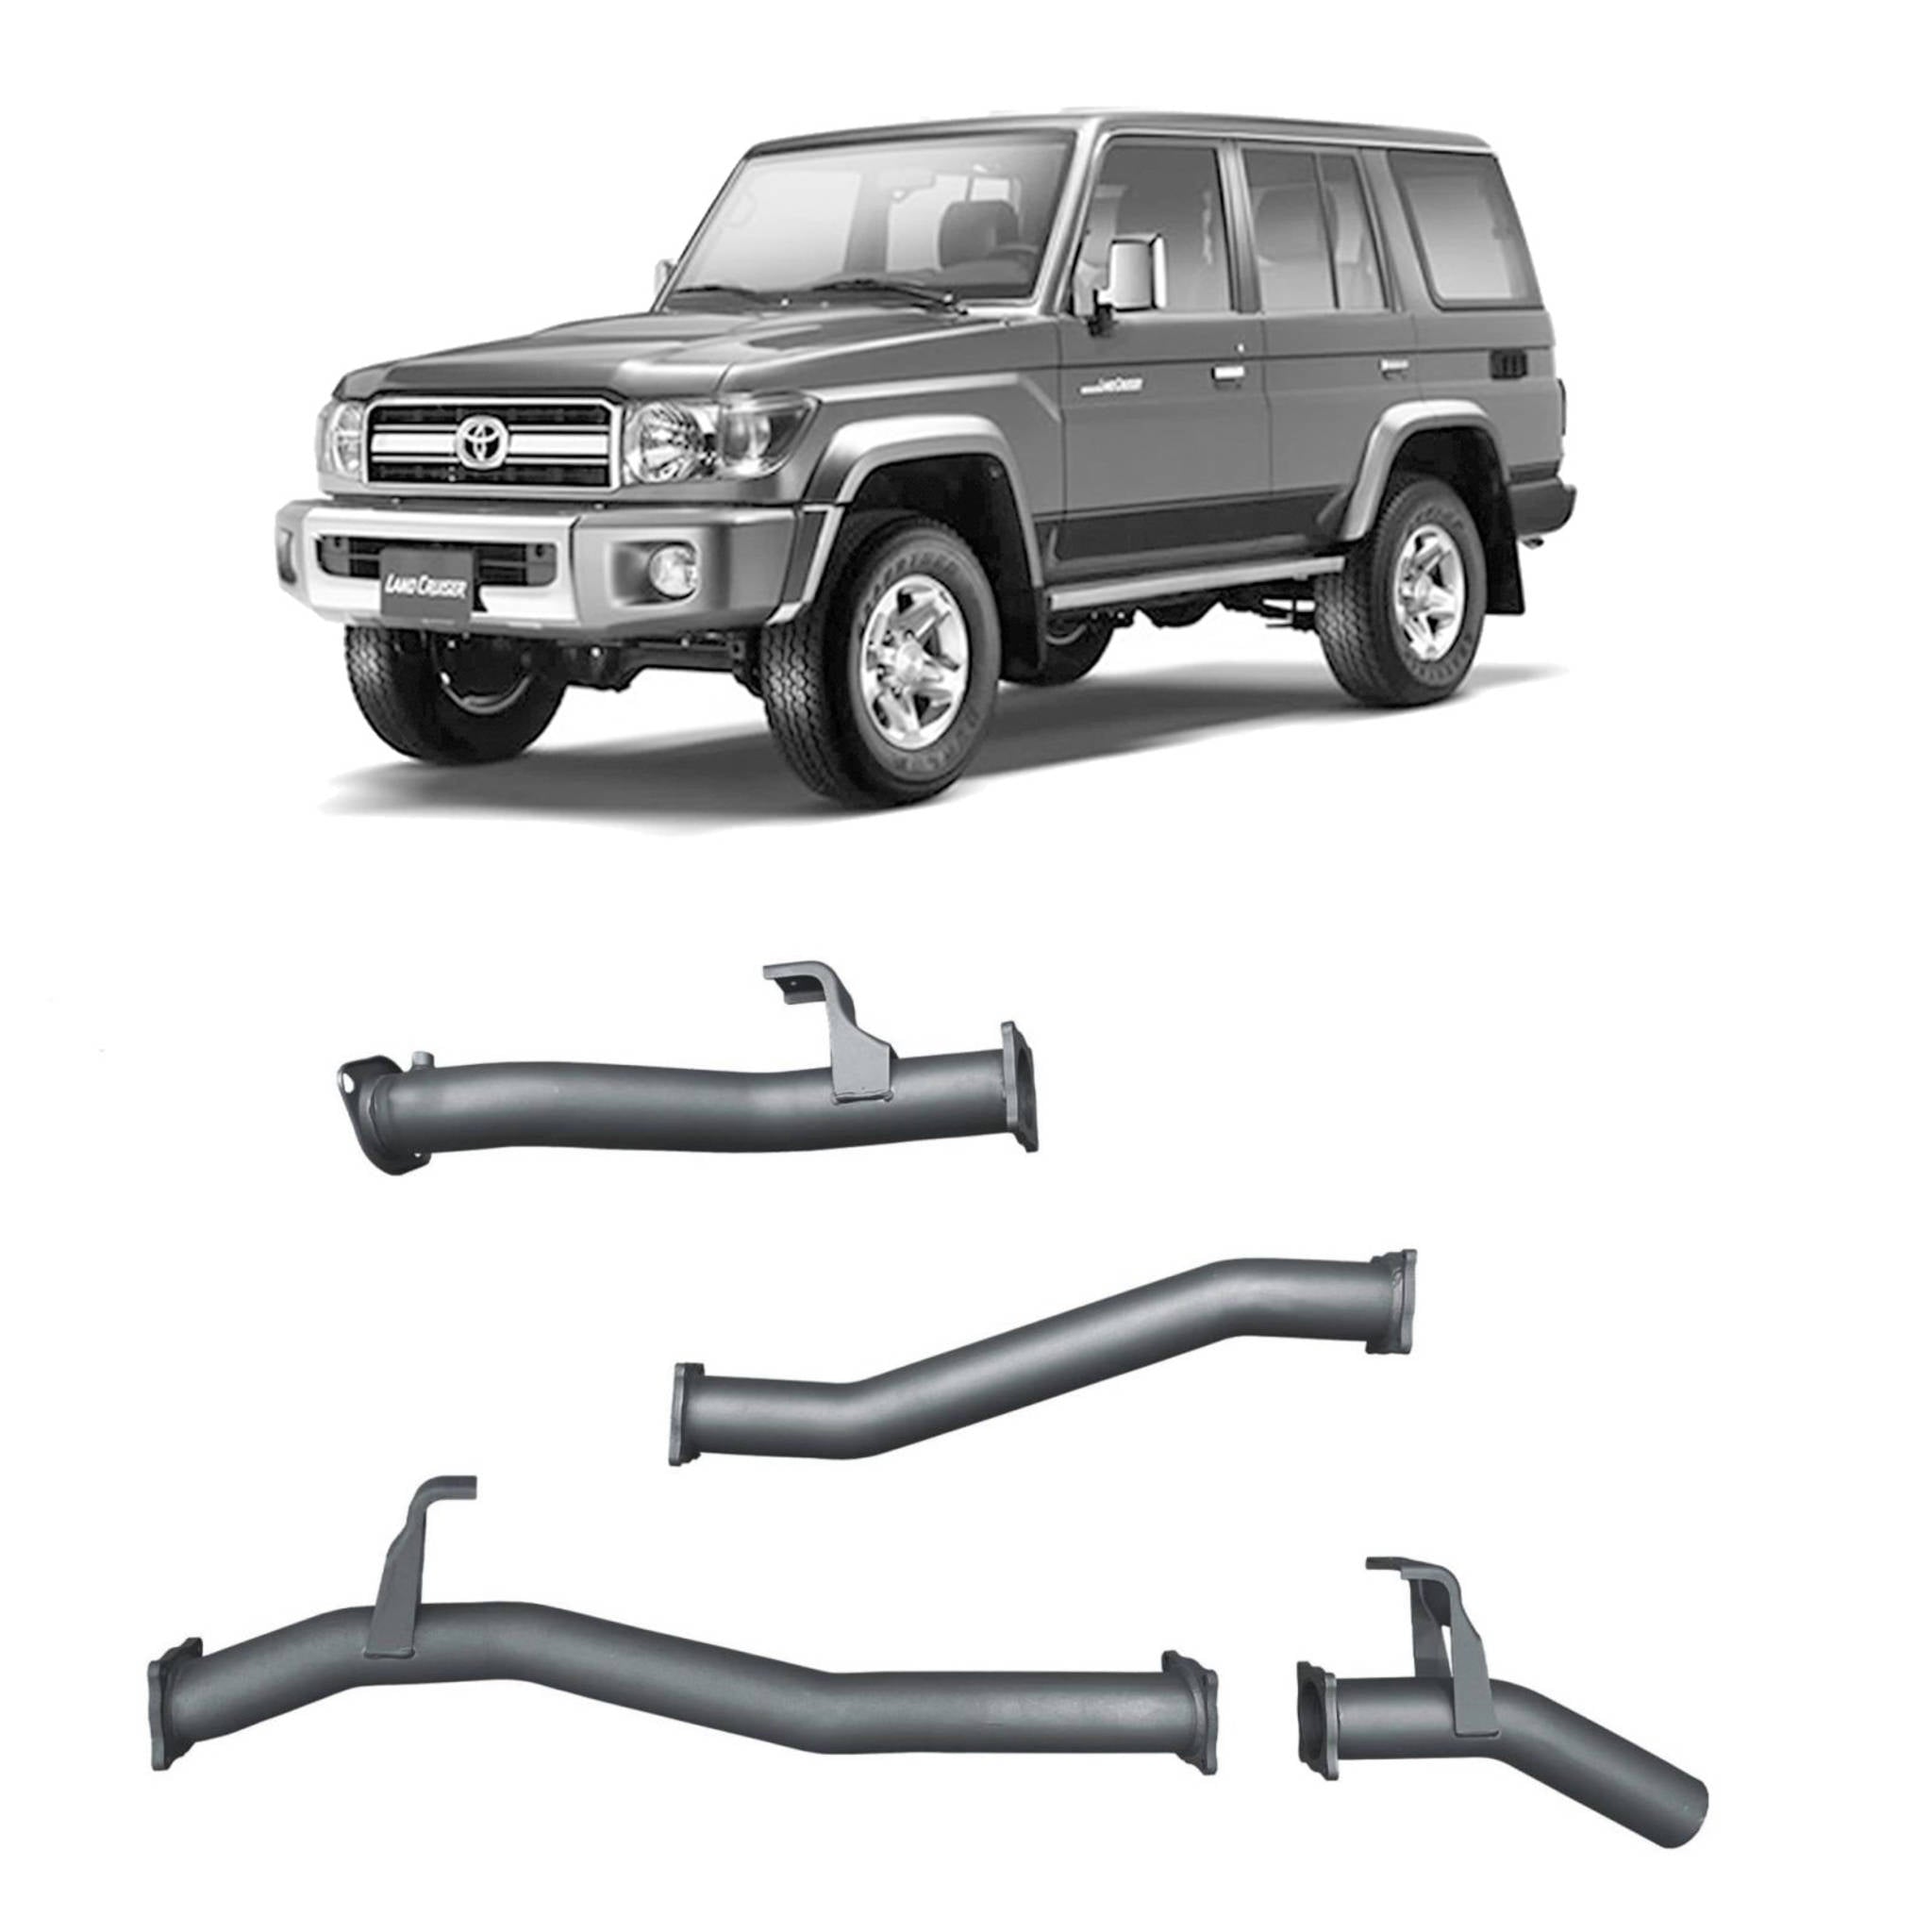 Redback Extreme Duty Exhaust to suit Toyota Landcruiser 76 Series Wagon (09/2016 - on)